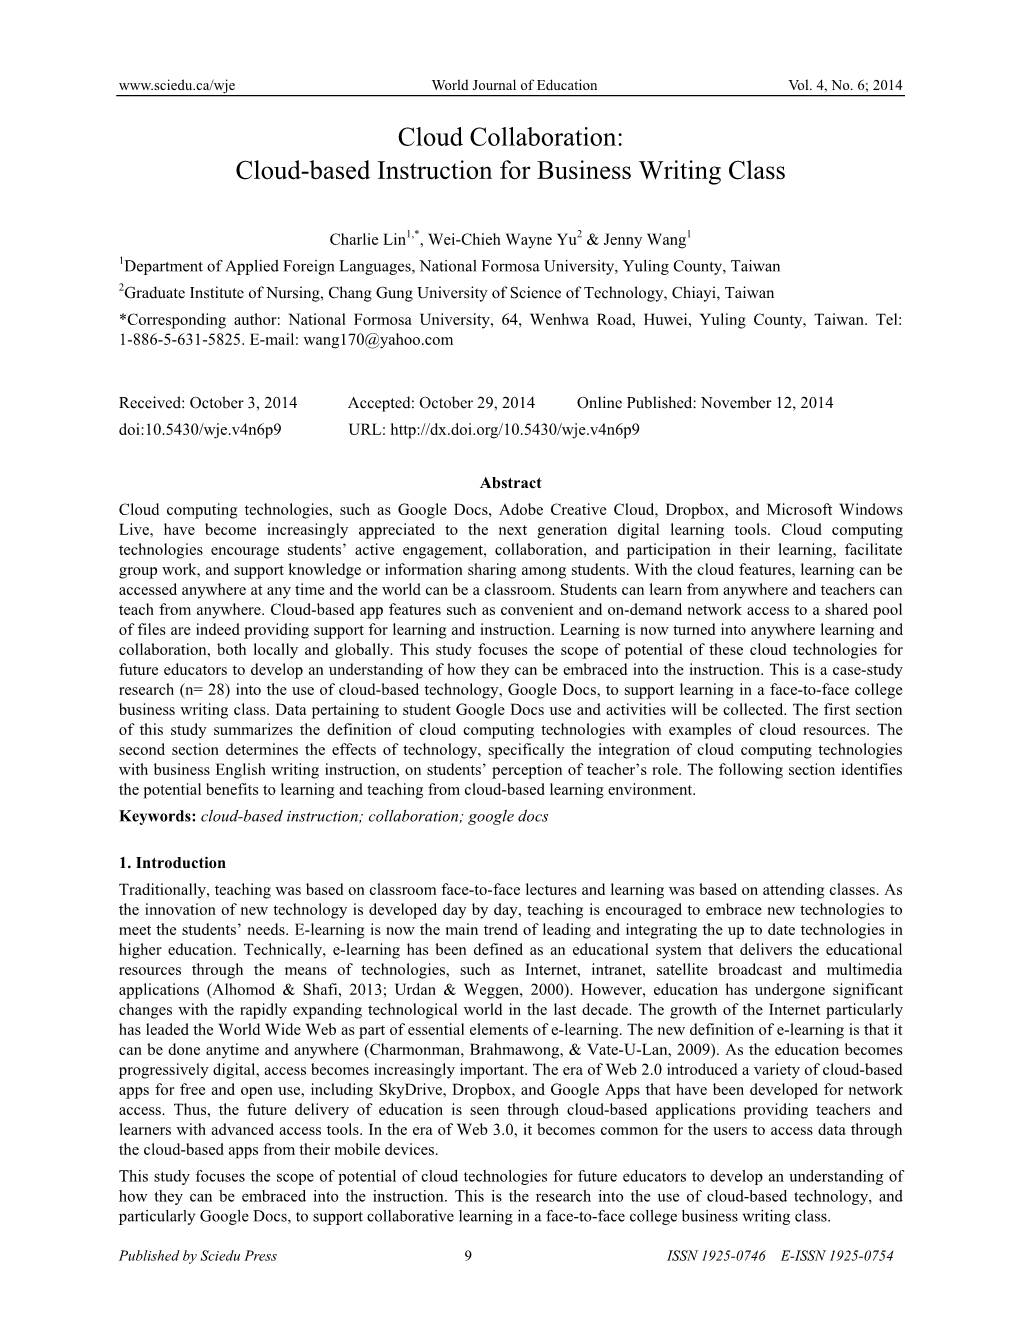 Cloud Collaboration: Cloud-Based Instruction for Business Writing Class